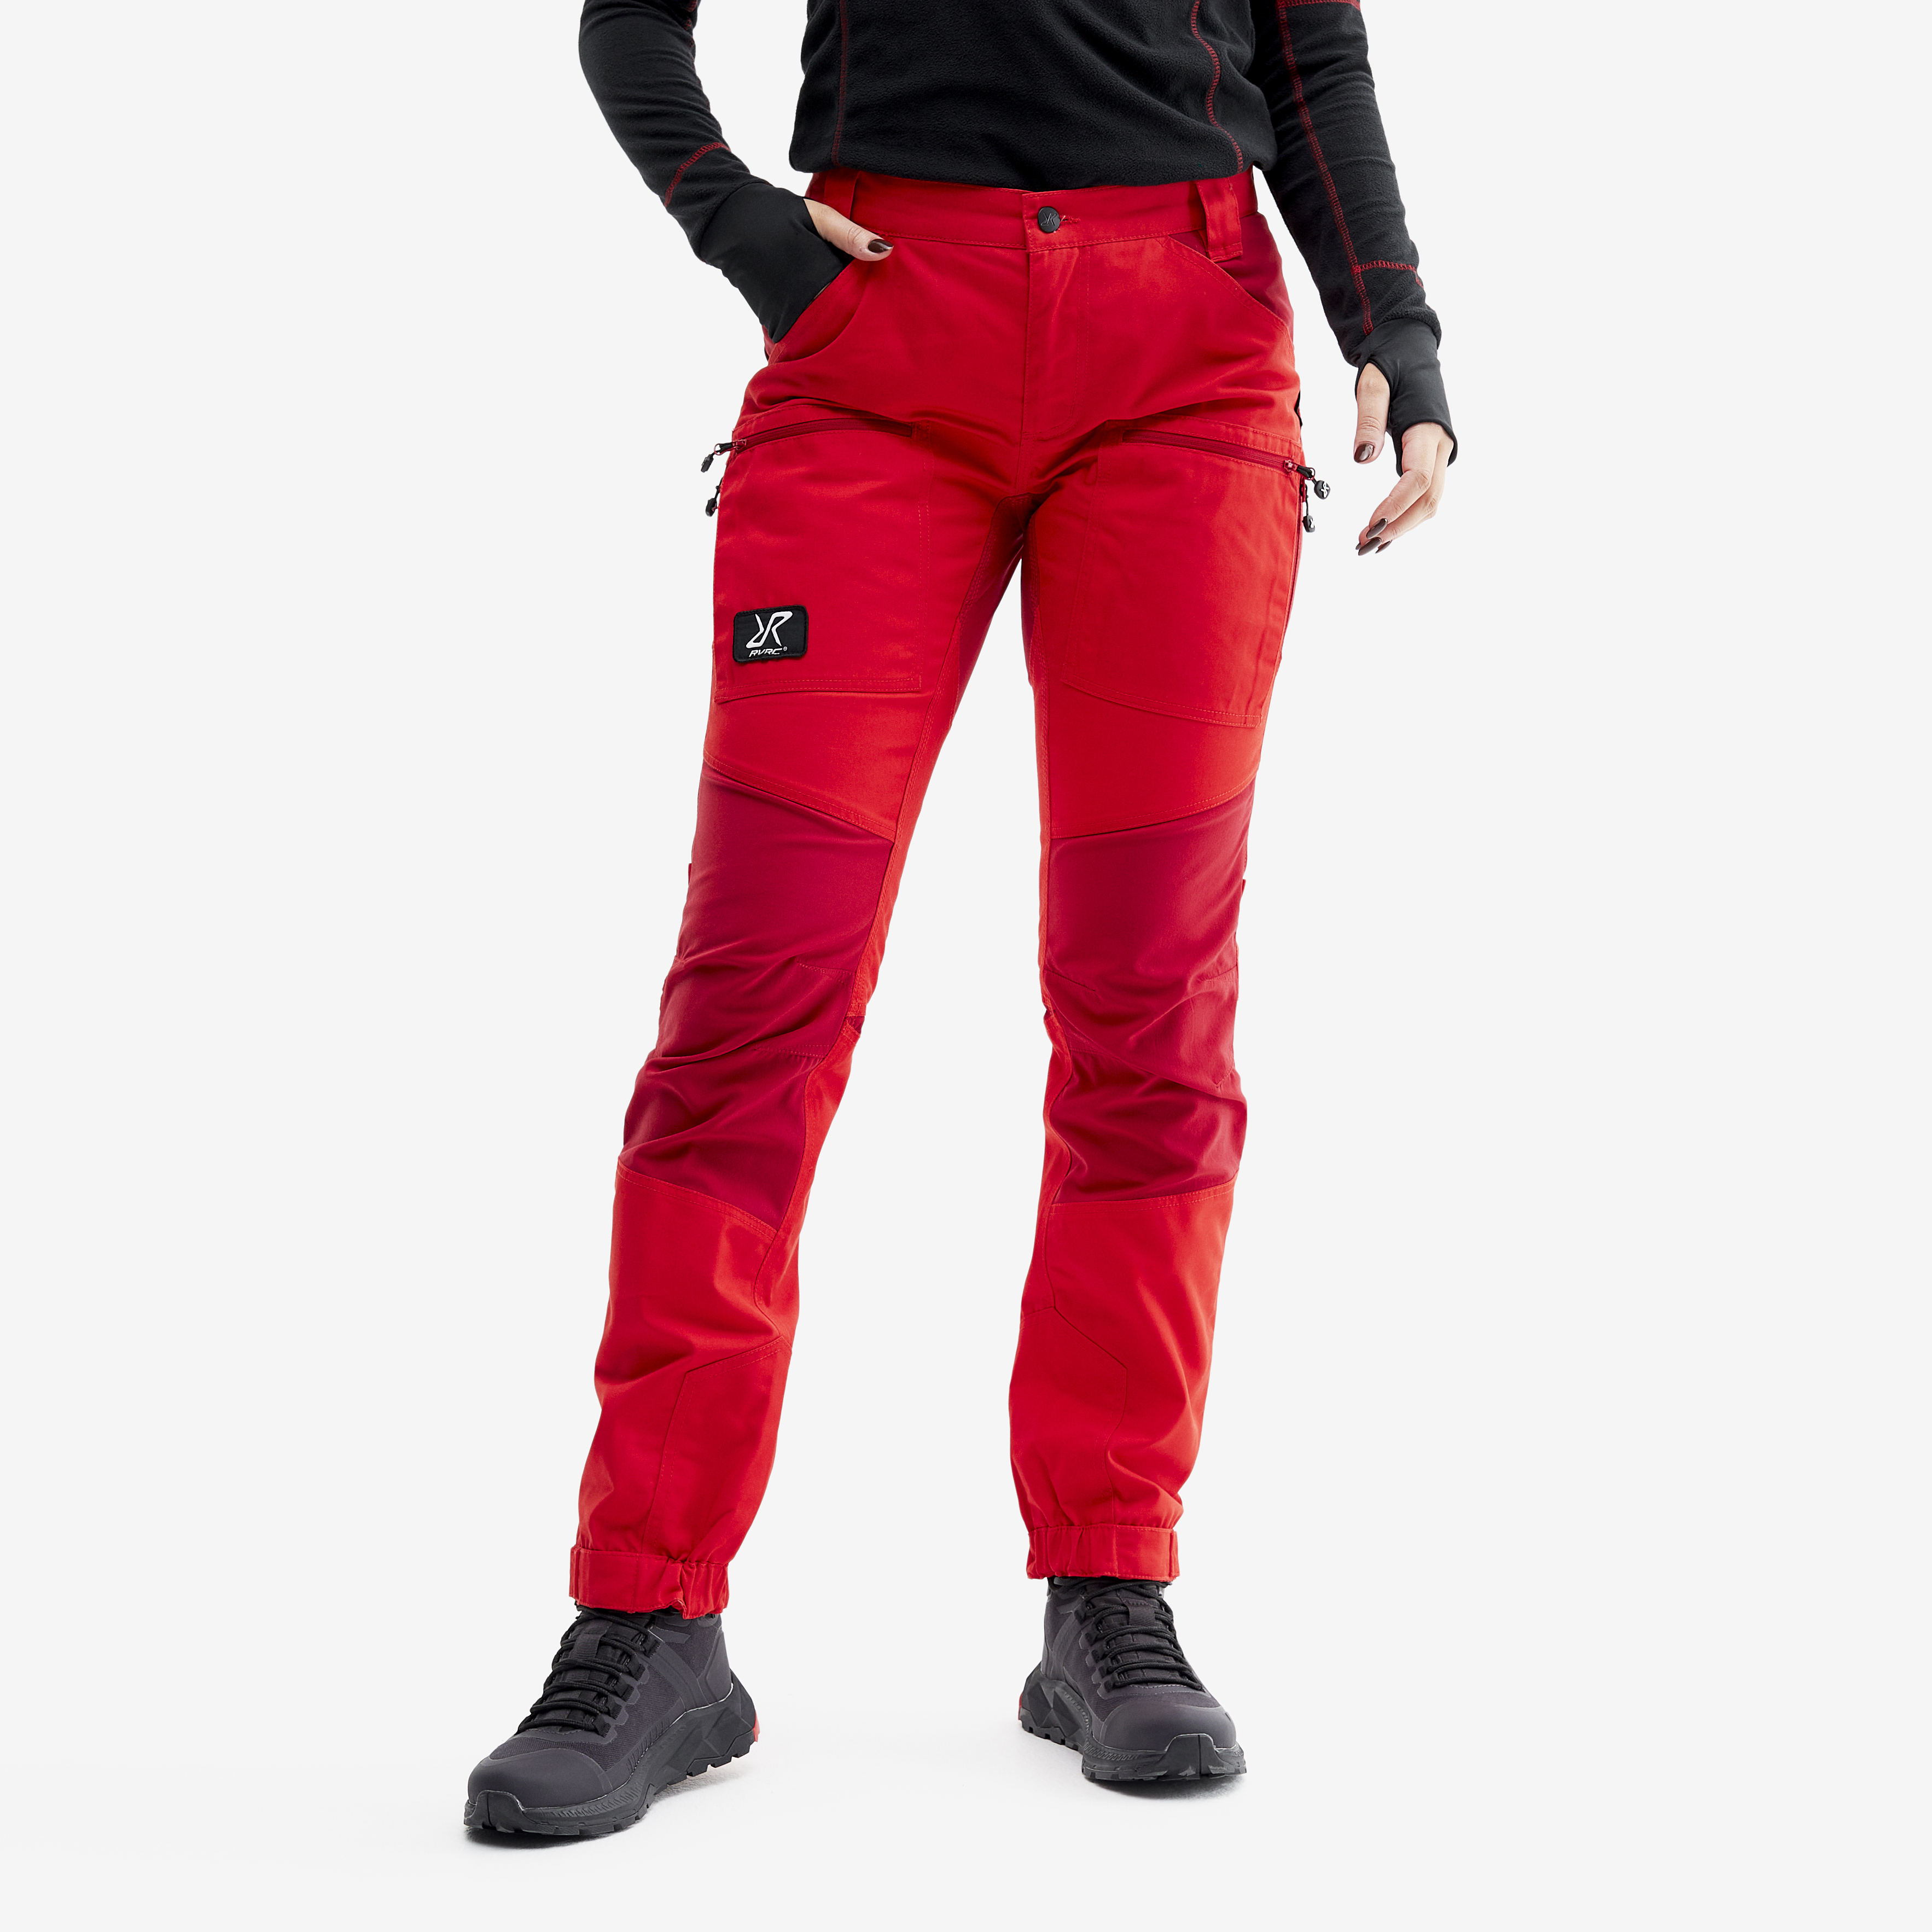 Nordwand Pro hiking trousers for women in red